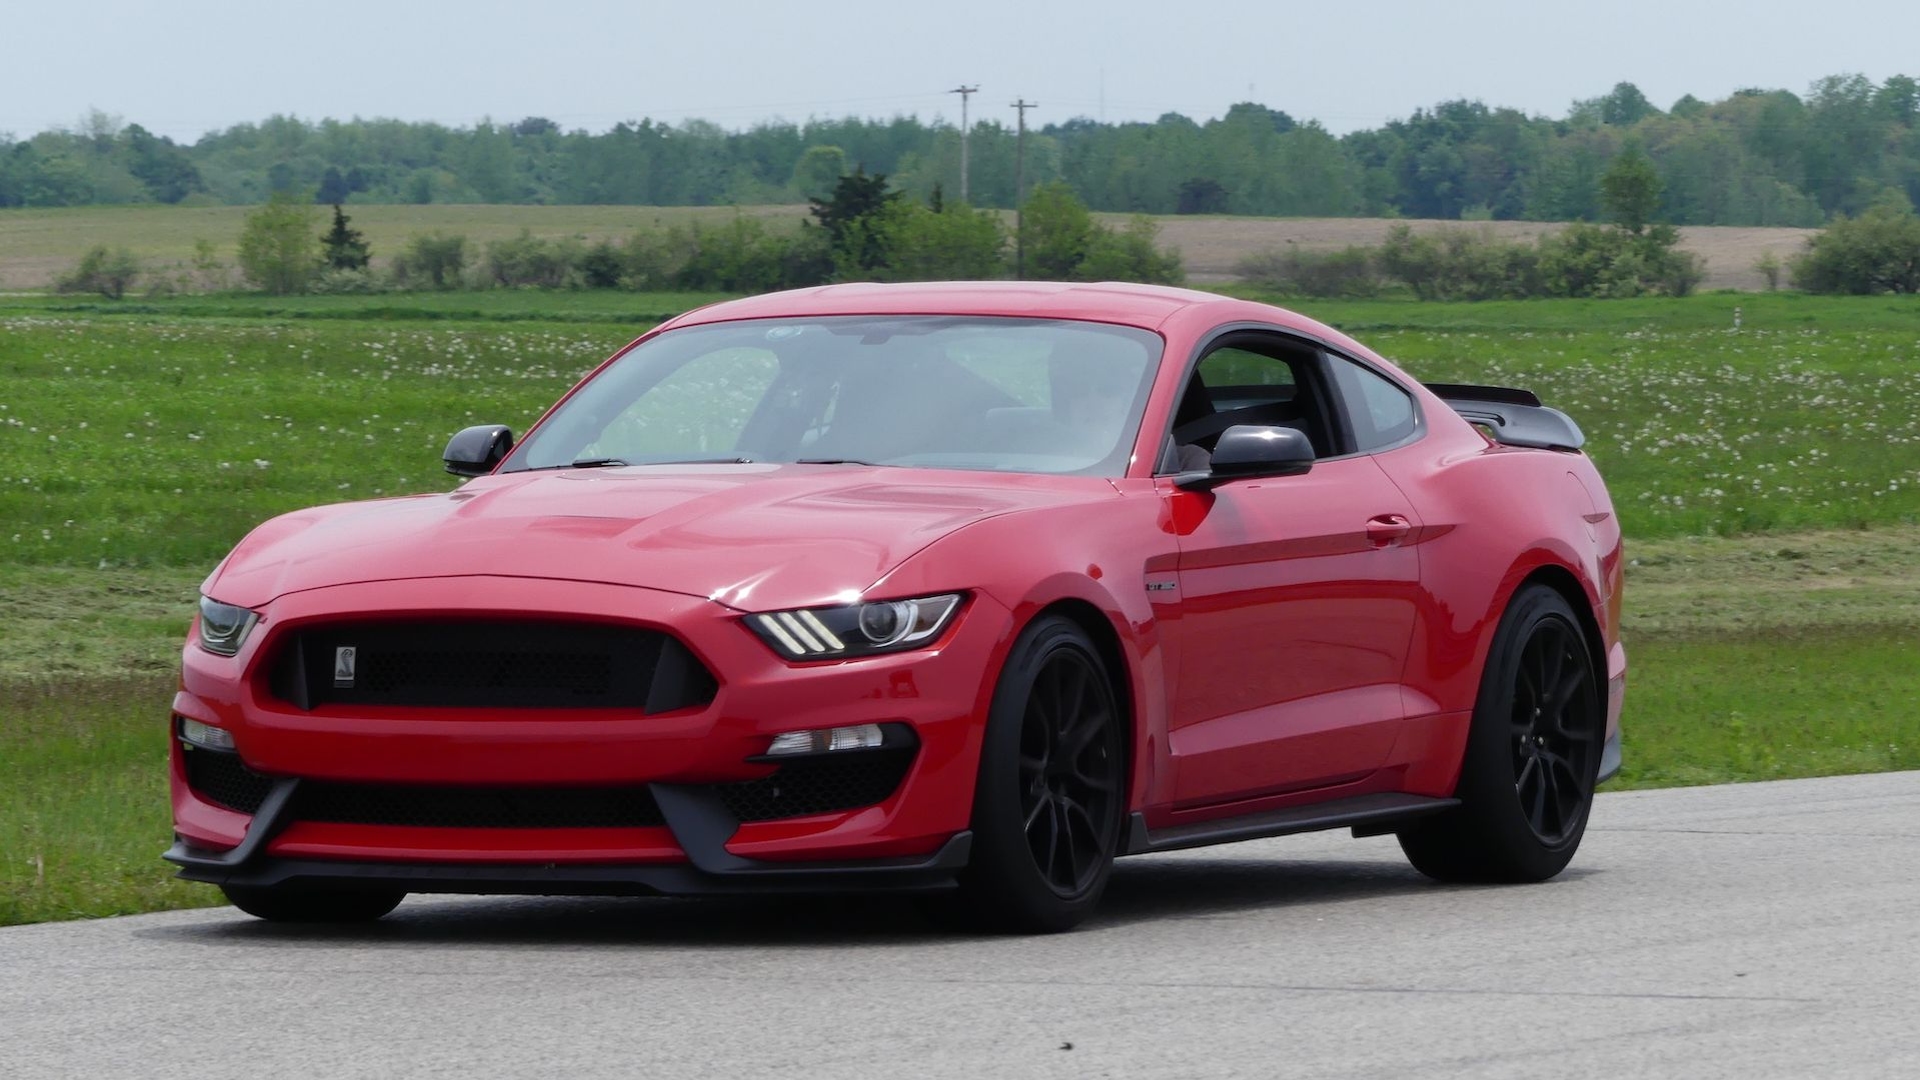 2019 Ford Mustang Shelby GT350 Gingerman Raceway track day, photo courtesy of James Fontaine